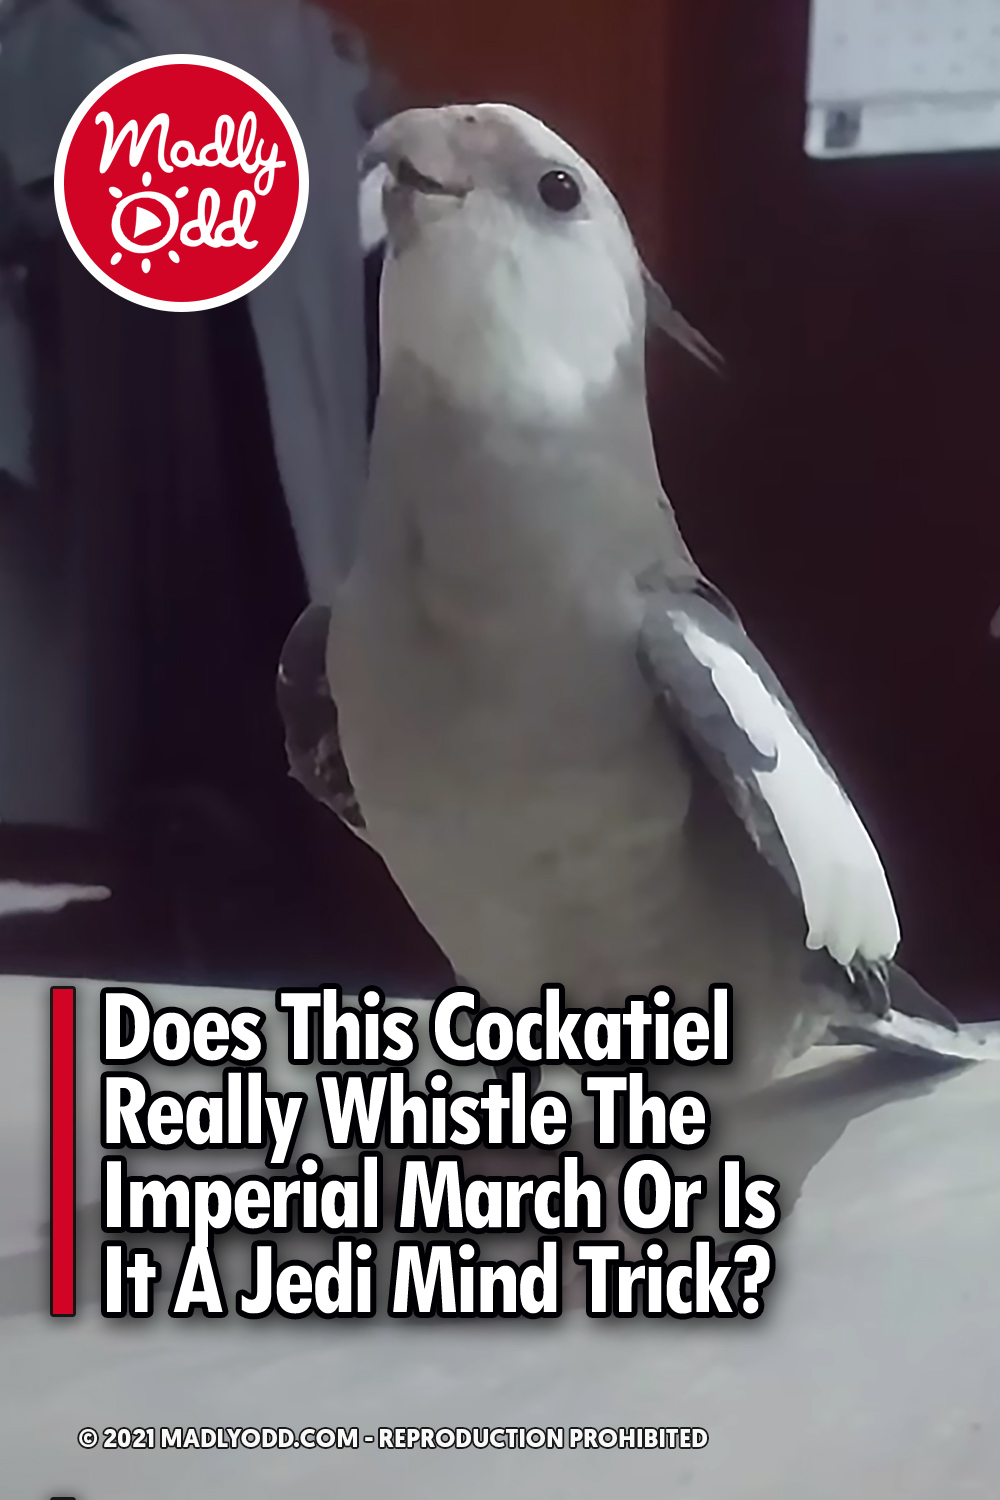 Does This Cockatiel Really Whistle The Imperial March Or Is It A Jedi Mind Trick?